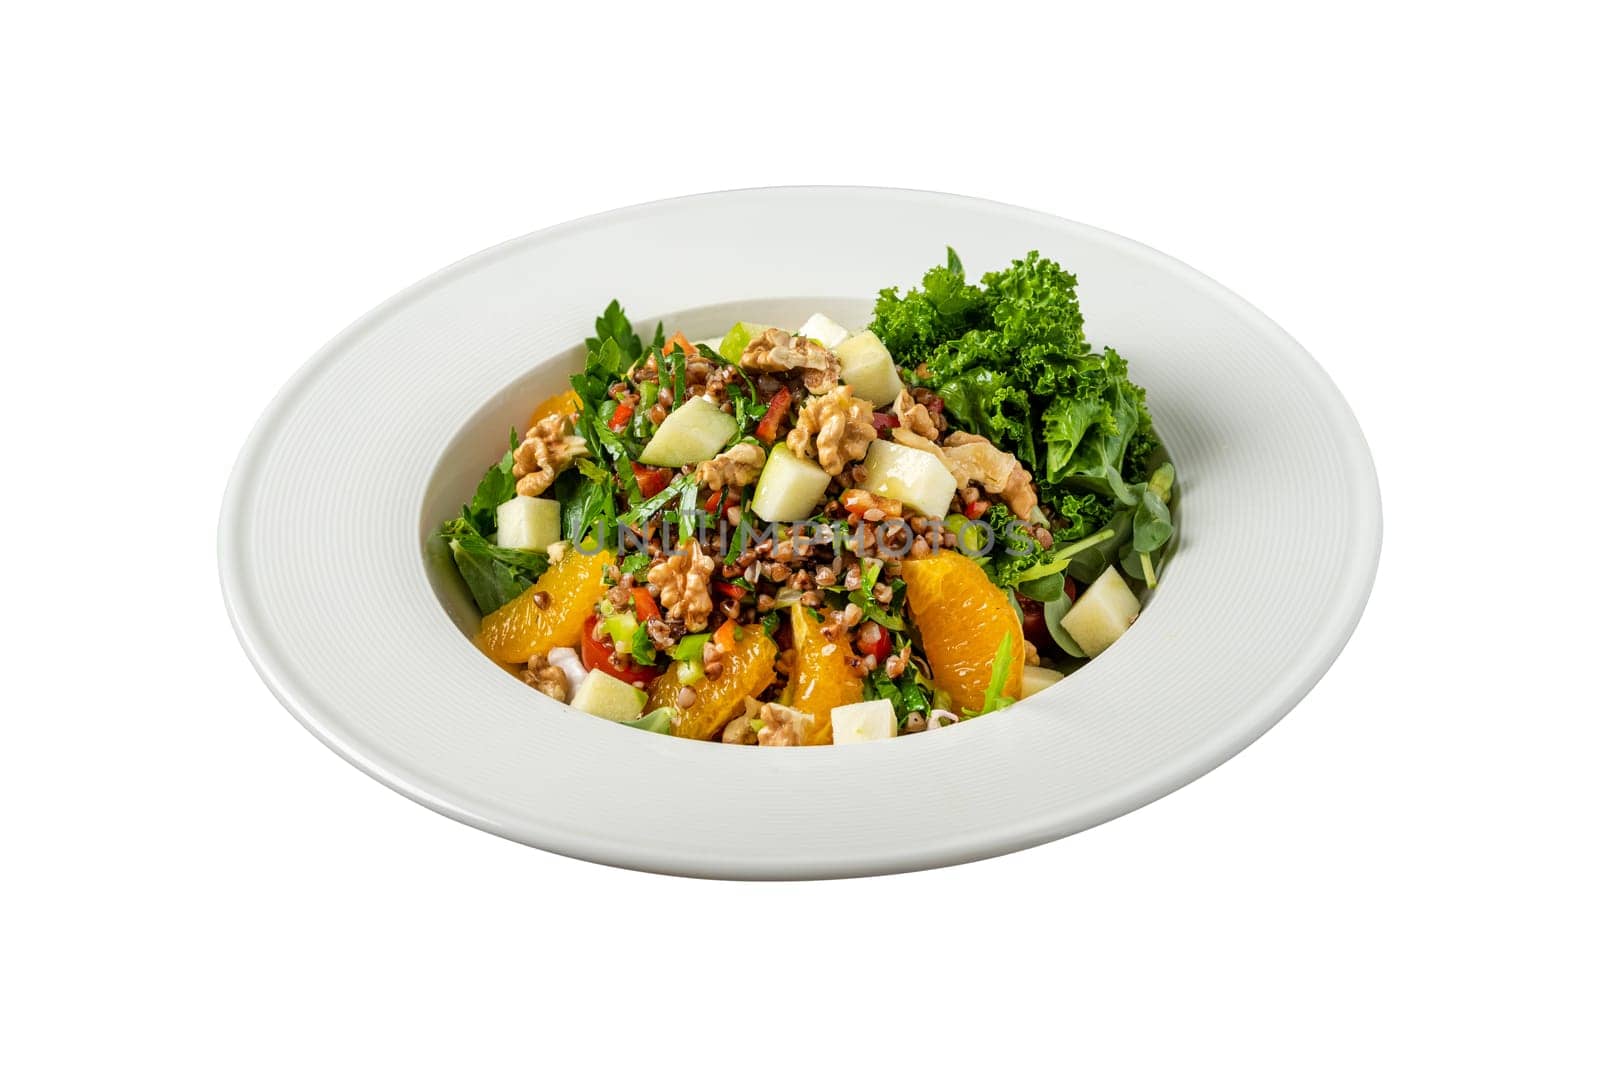 quinoa salad with walnuts, oranges and kale leaves by Sonat